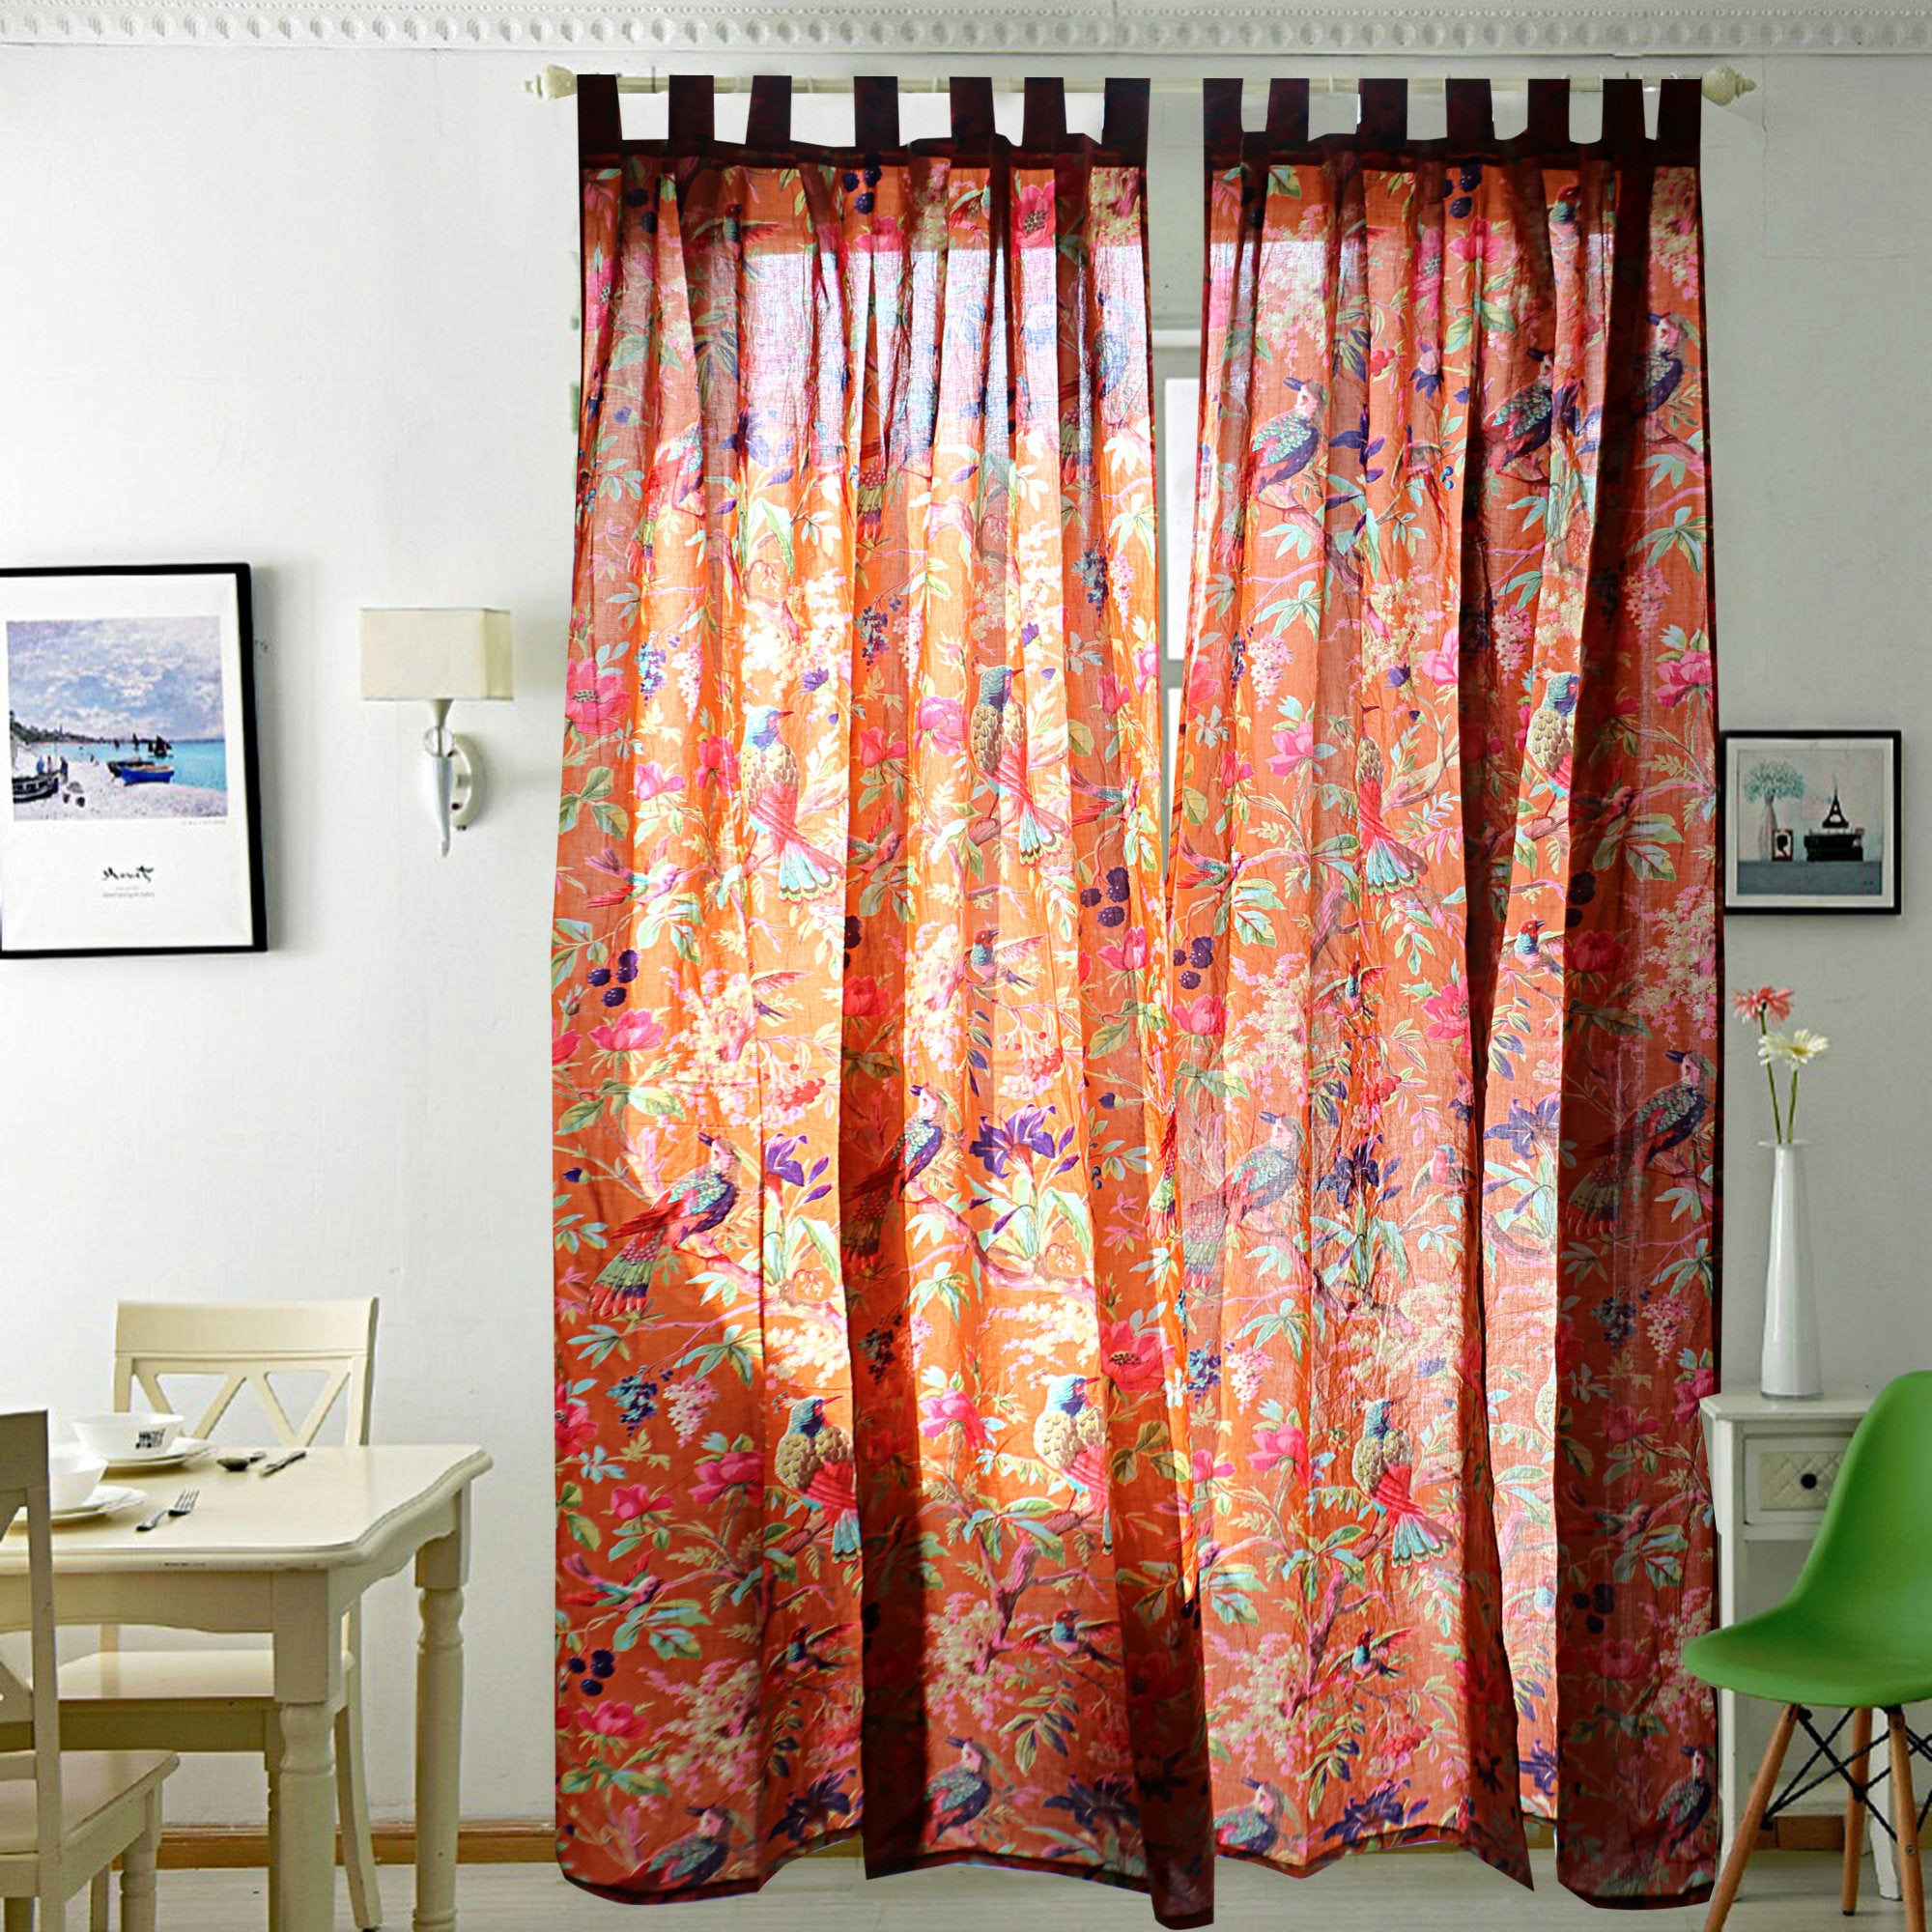 'Birds and Blooms' 100% Cotton Boho Curtains